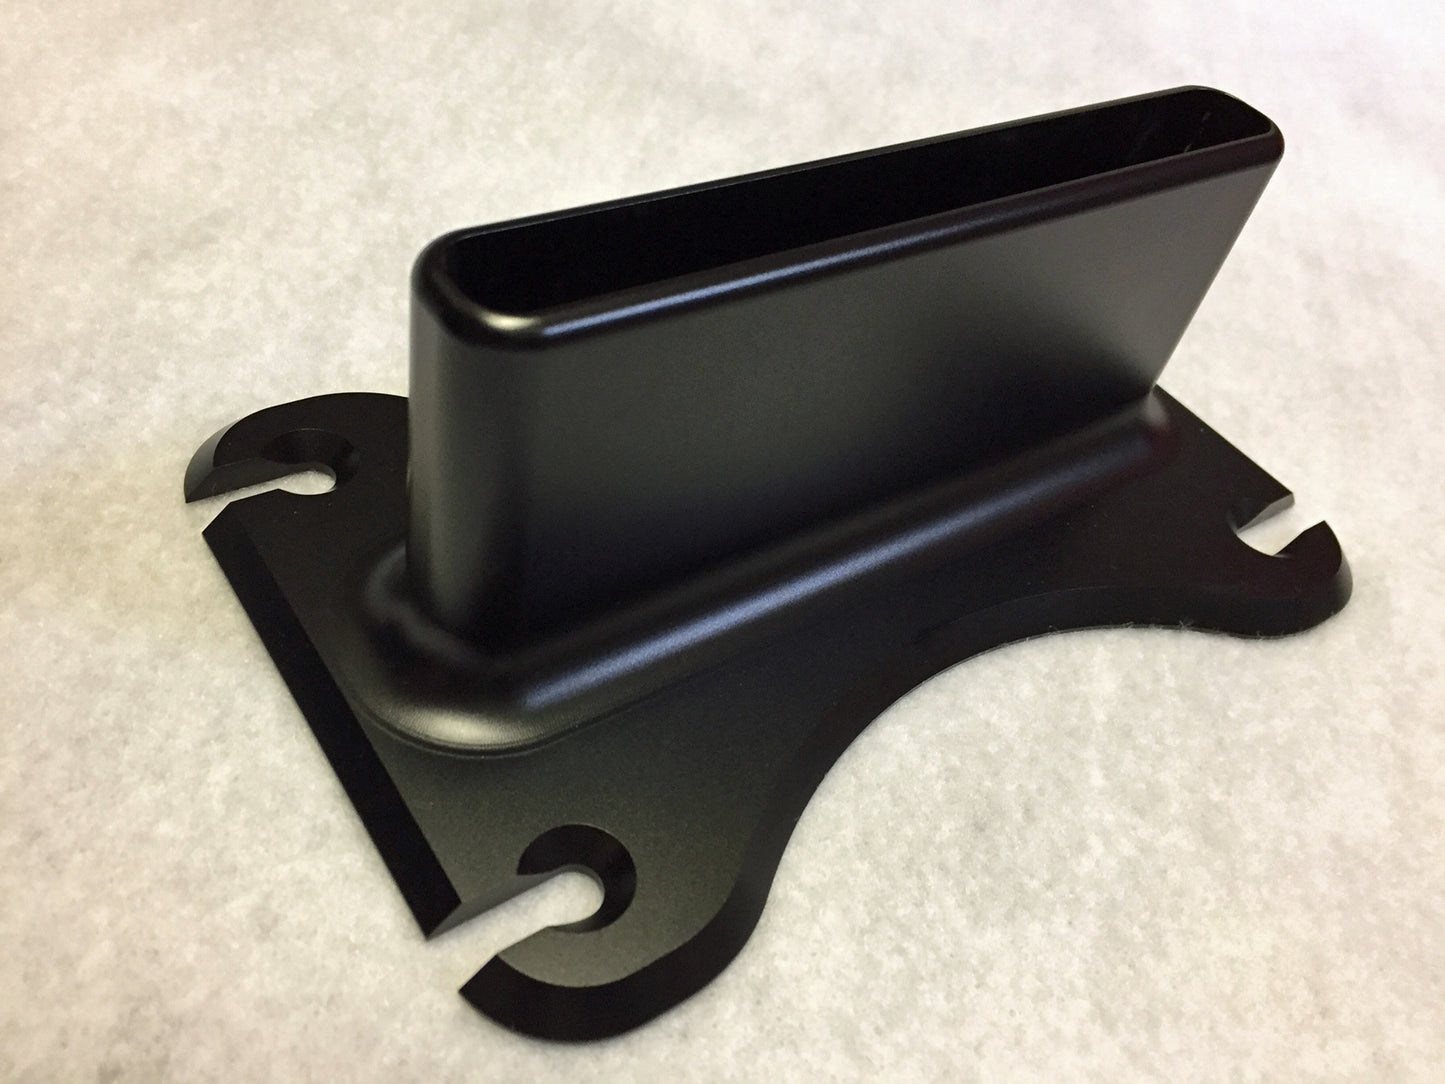 GoFoil and Standard Deep Tuttle Drop-in Plate Adapter